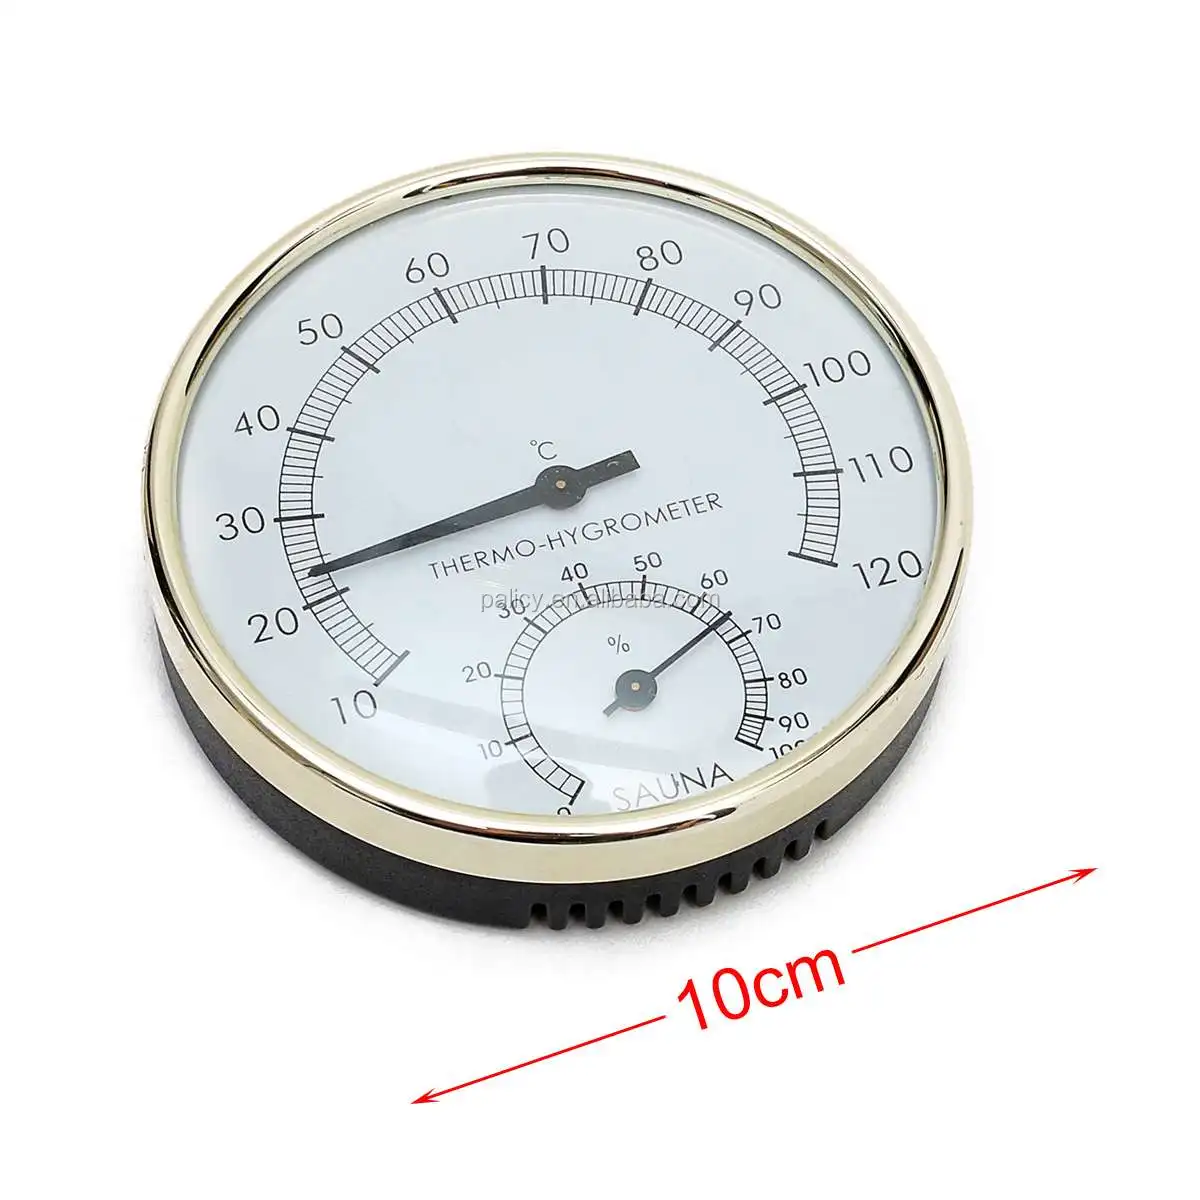 NEW 5 Pcs Sauna Steam Accessories Wooden Barrel Spoon Hourglass Thermometer Lamp 